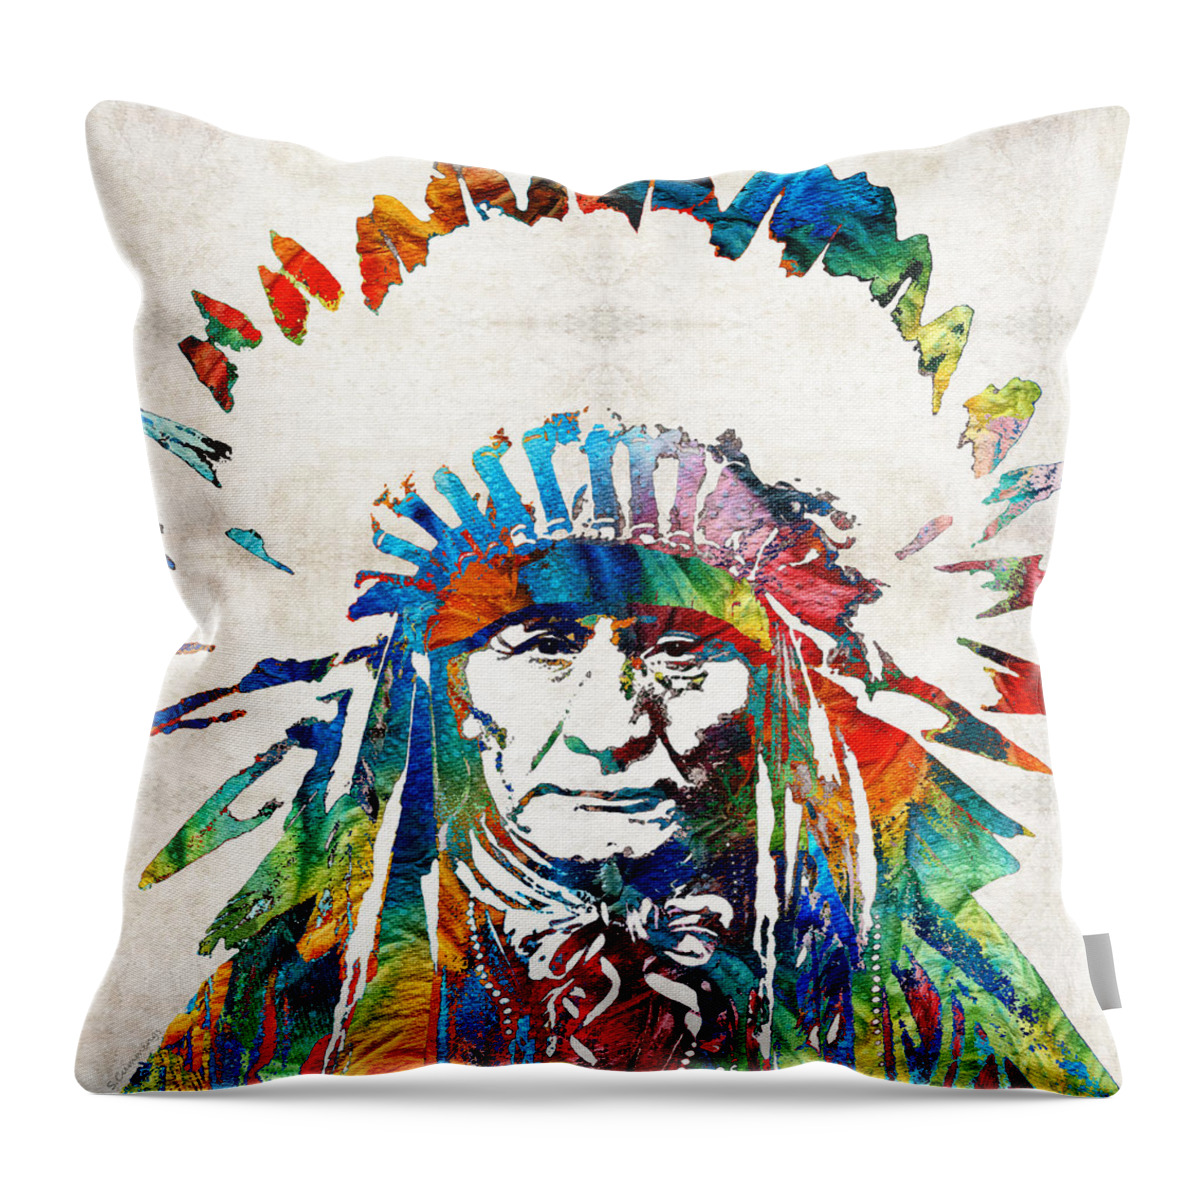 Native American Throw Pillow featuring the painting Native American Art - Chief - By Sharon Cummings by Sharon Cummings